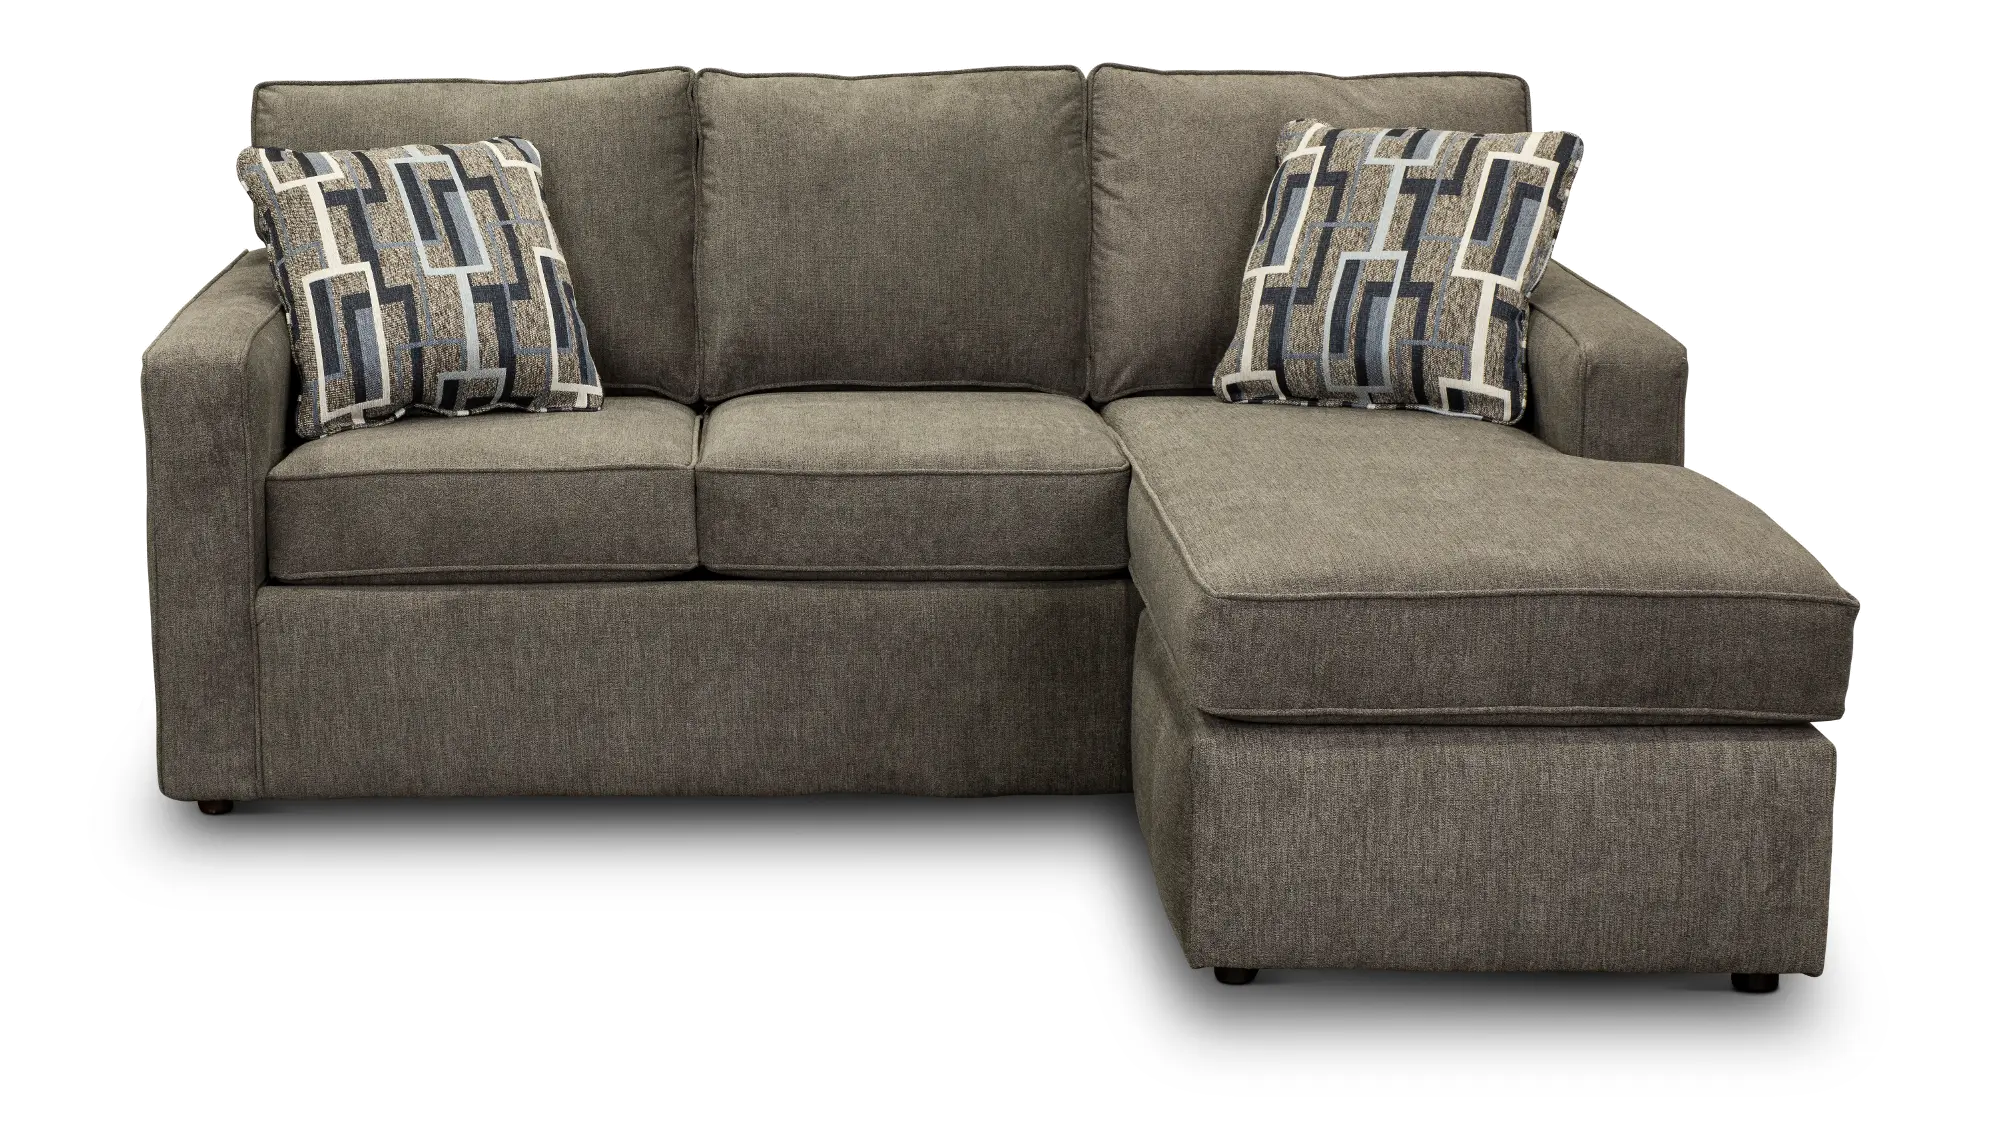 Norris Graphite Gray Queen Sleeper Sofa with Ottoman